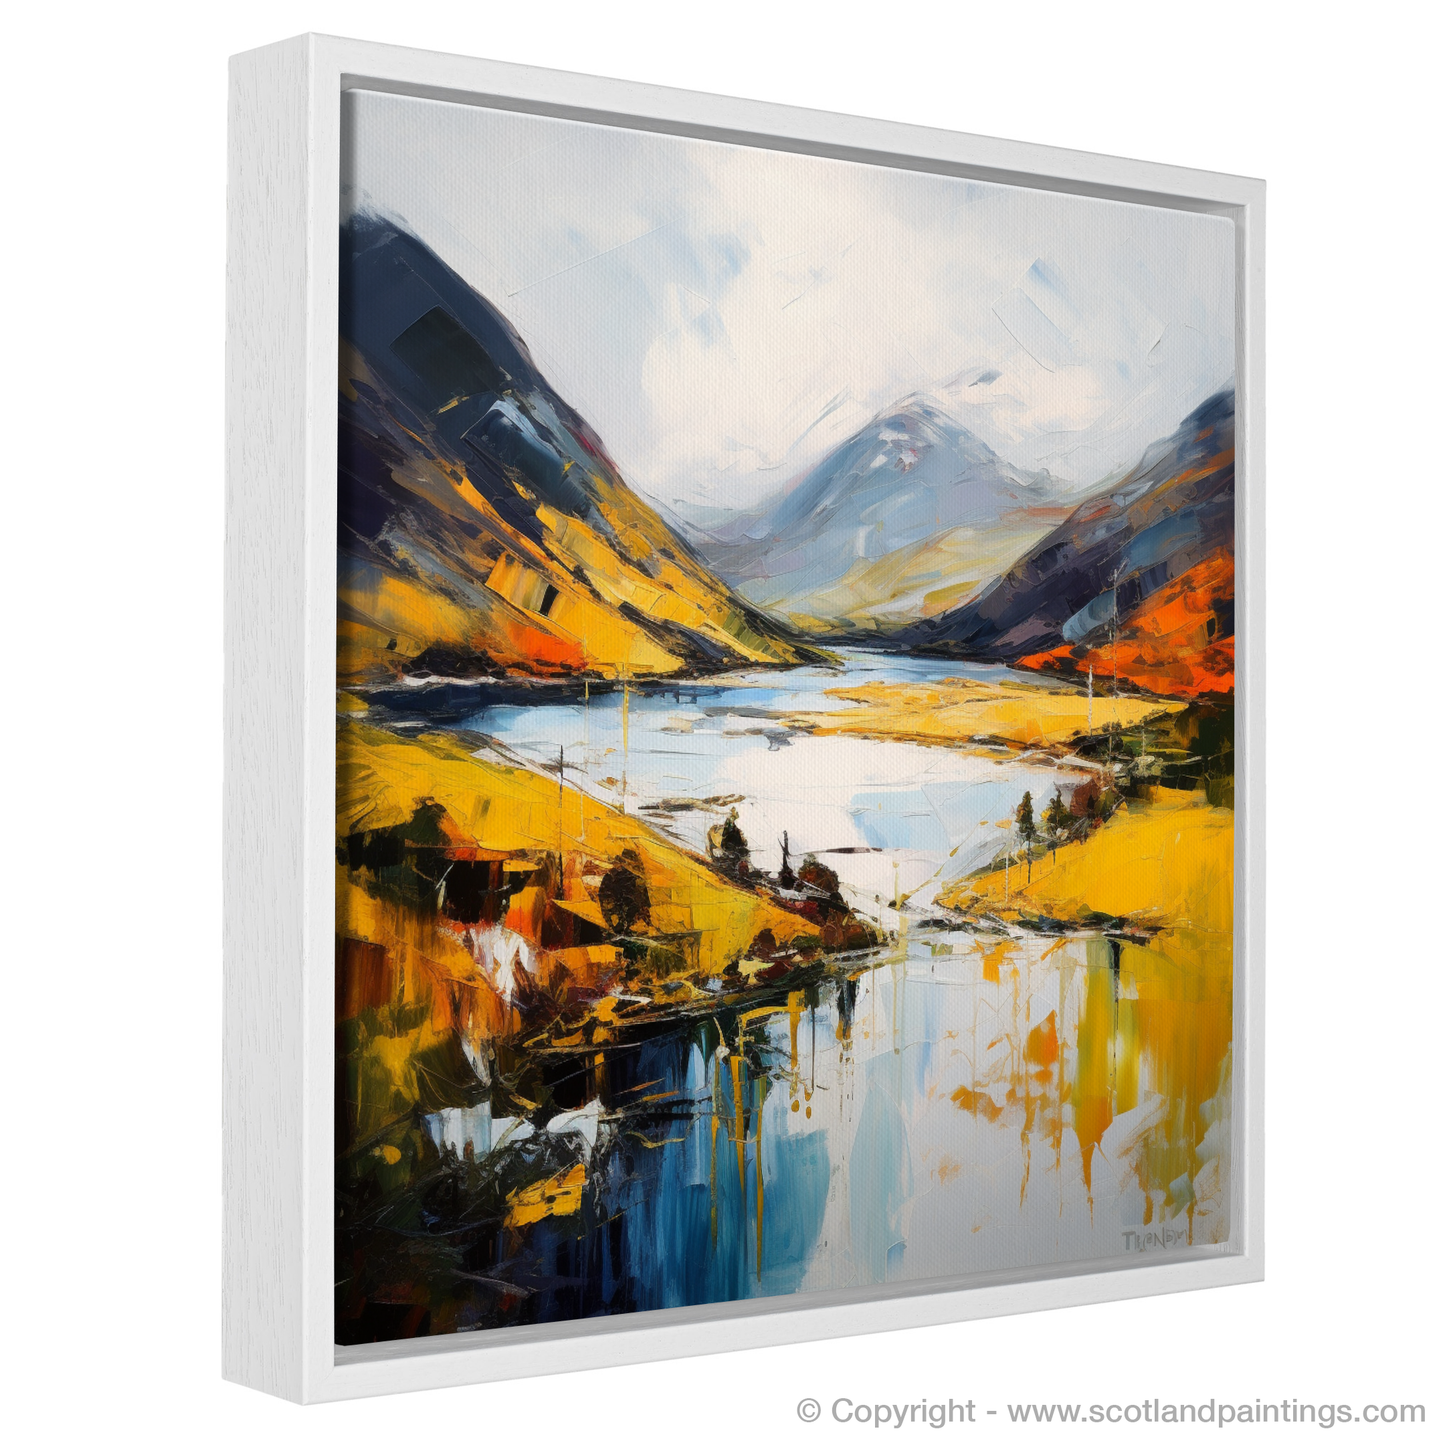 Painting and Art Print of Loch Shiel, Highlands entitled "Highland Symphony: An Expressionist Ode to Loch Shiel".